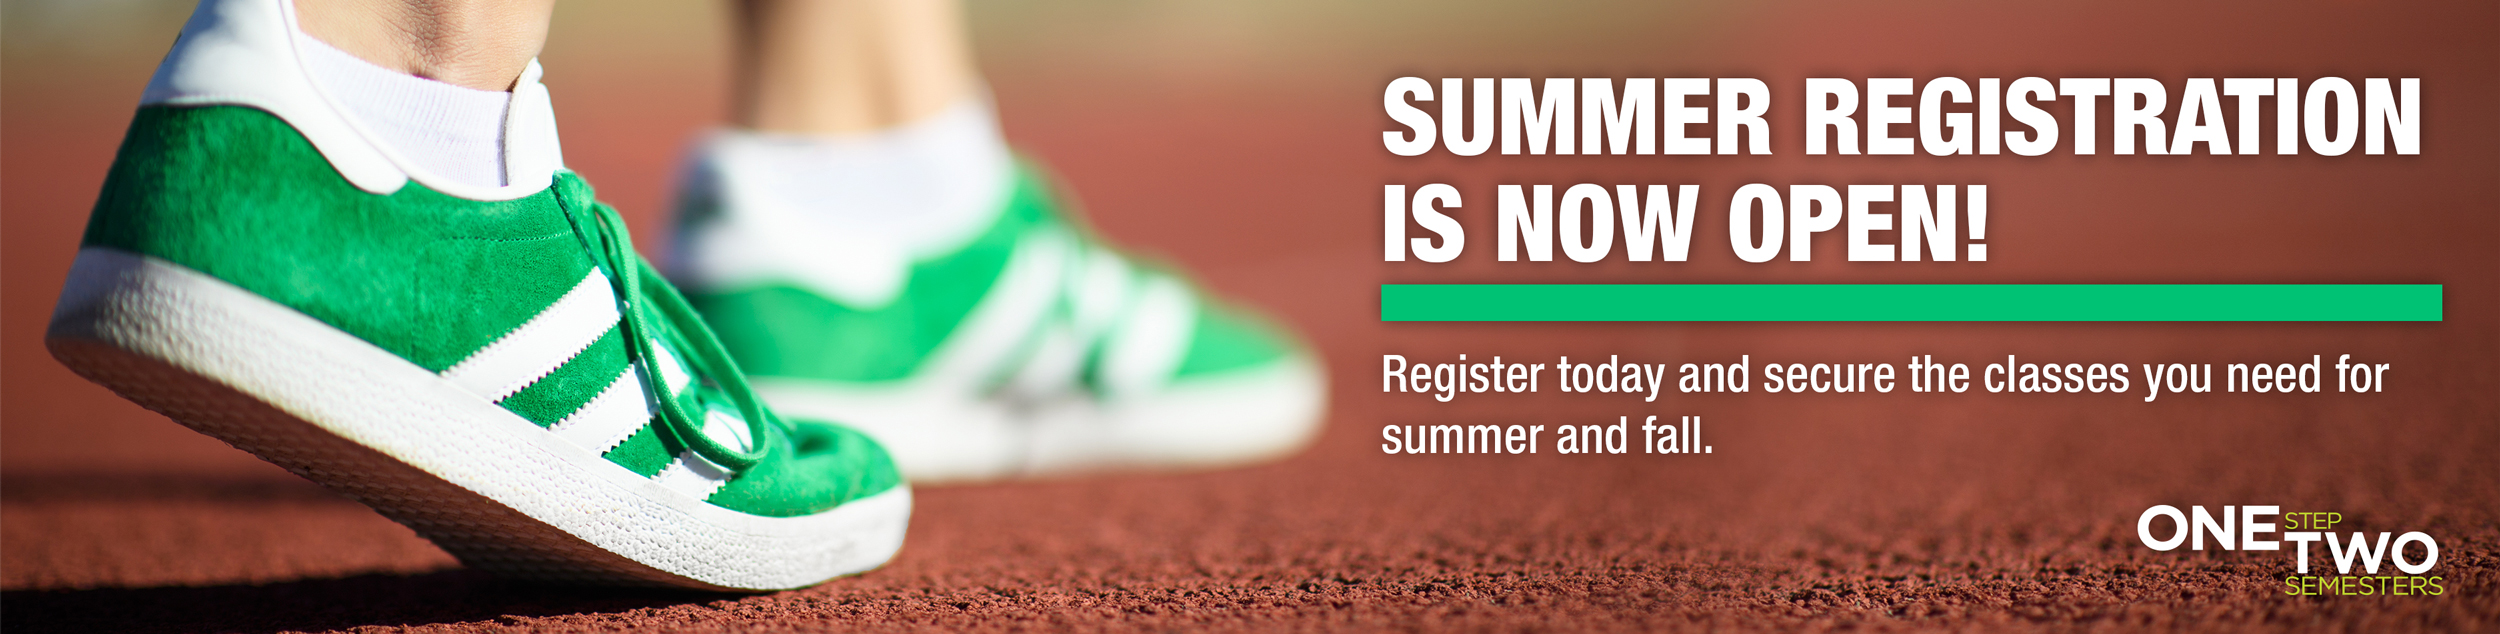 Stay on track to graduate on time! Register for Summer classes to finish faster.